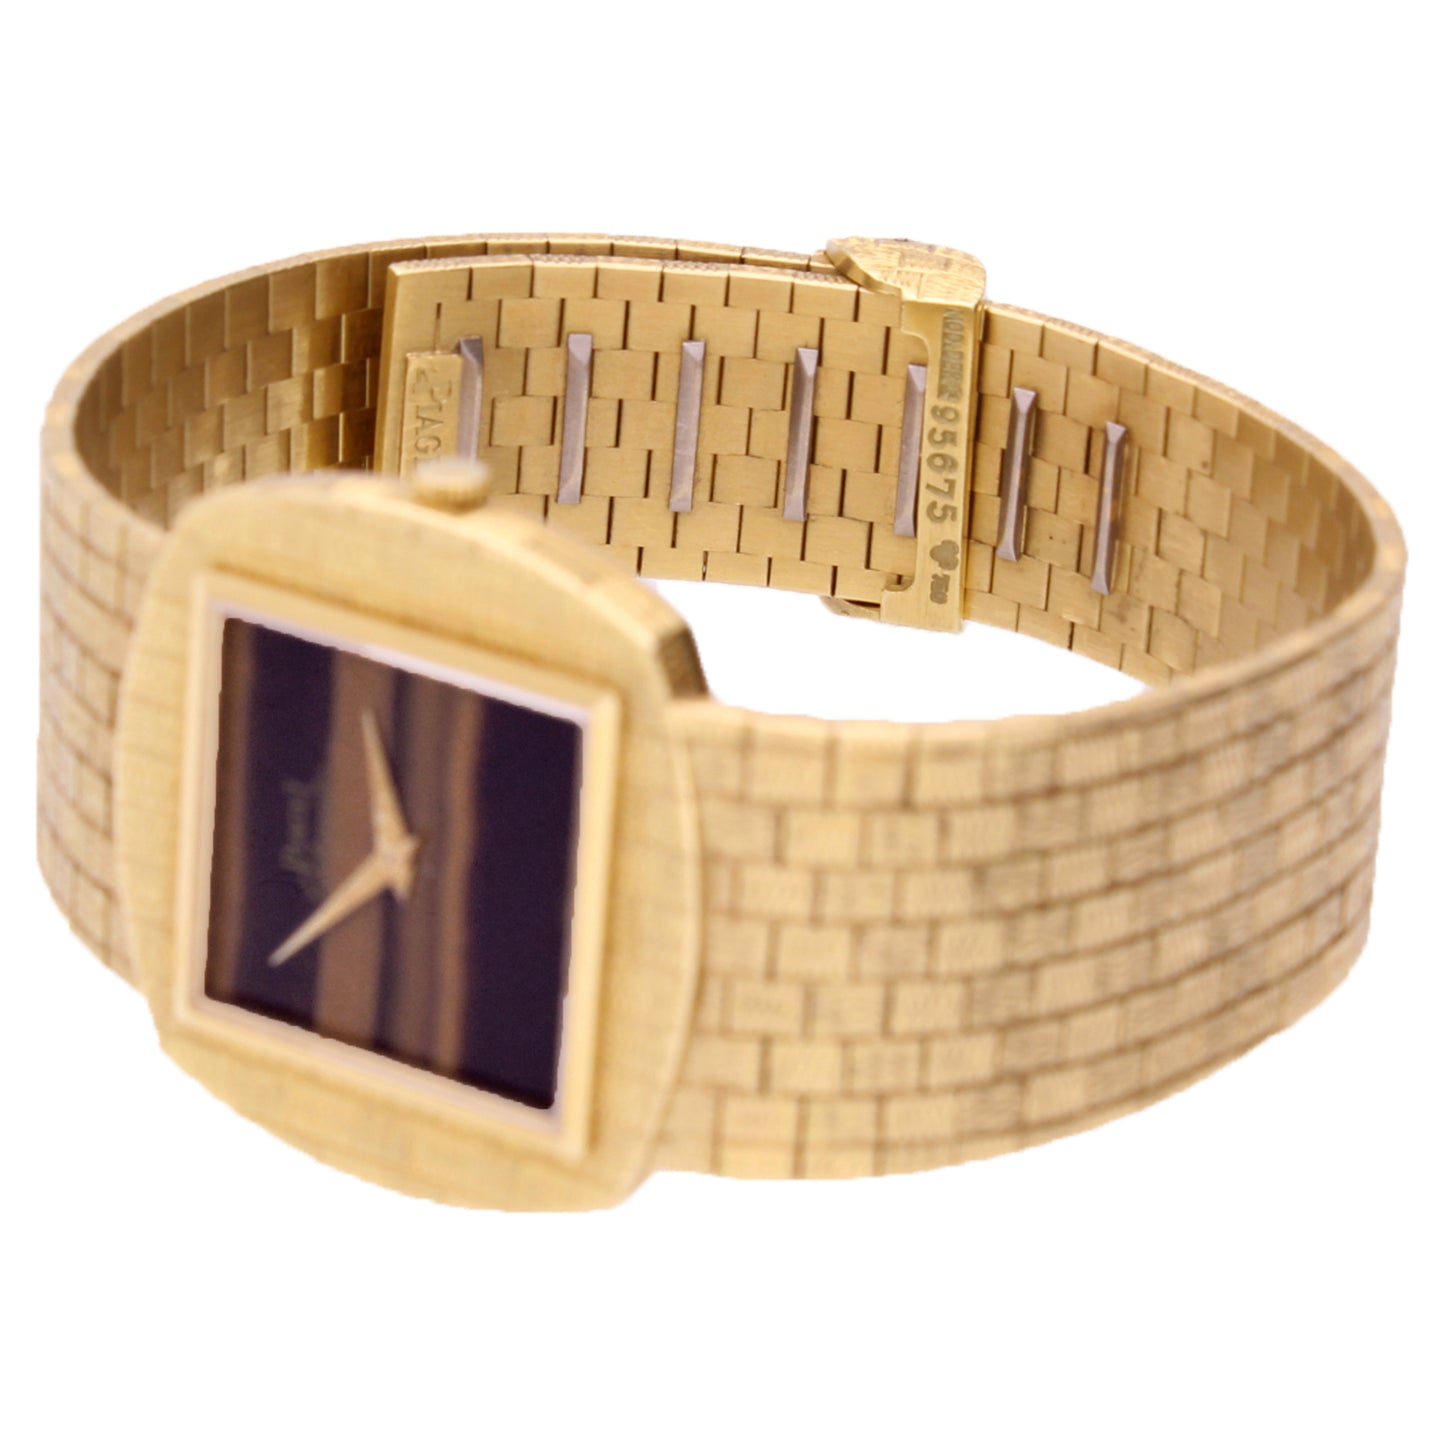 18ct yellow gold Piaget, reference 12461 automatic bracelet watch with tigers eye dial. Made 1971